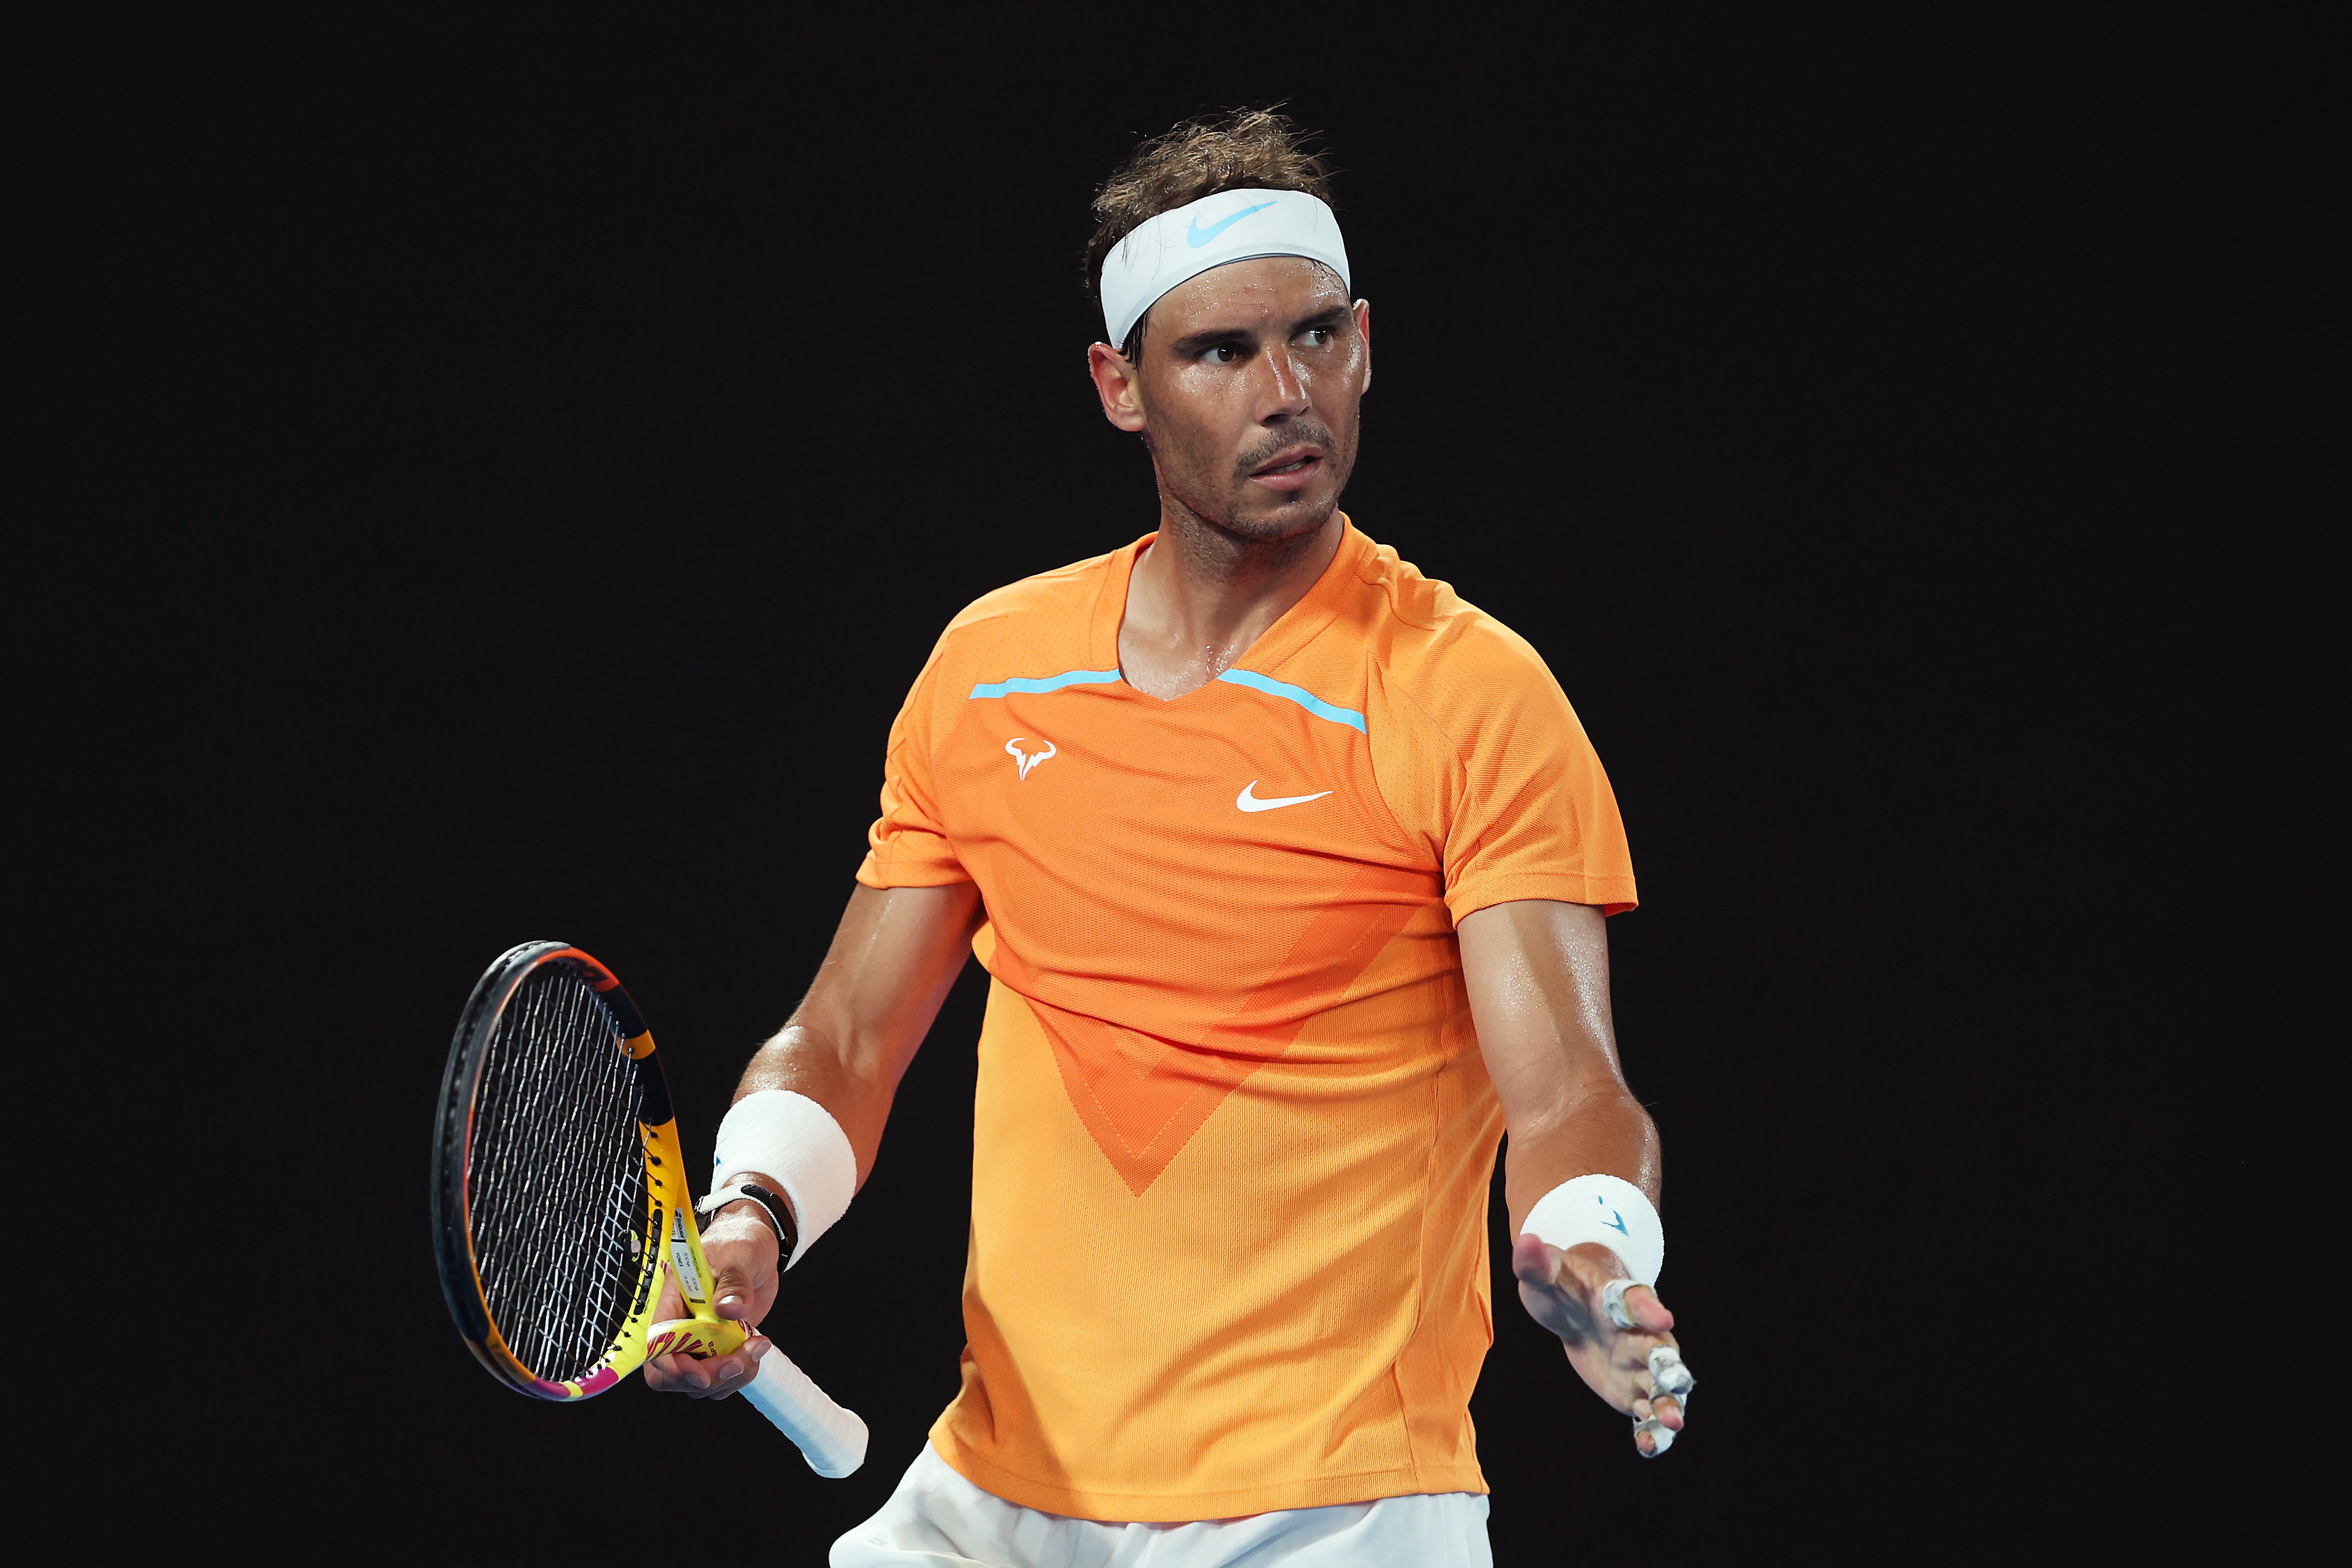 Hes back! Rafael Nadal posts clay-court training video